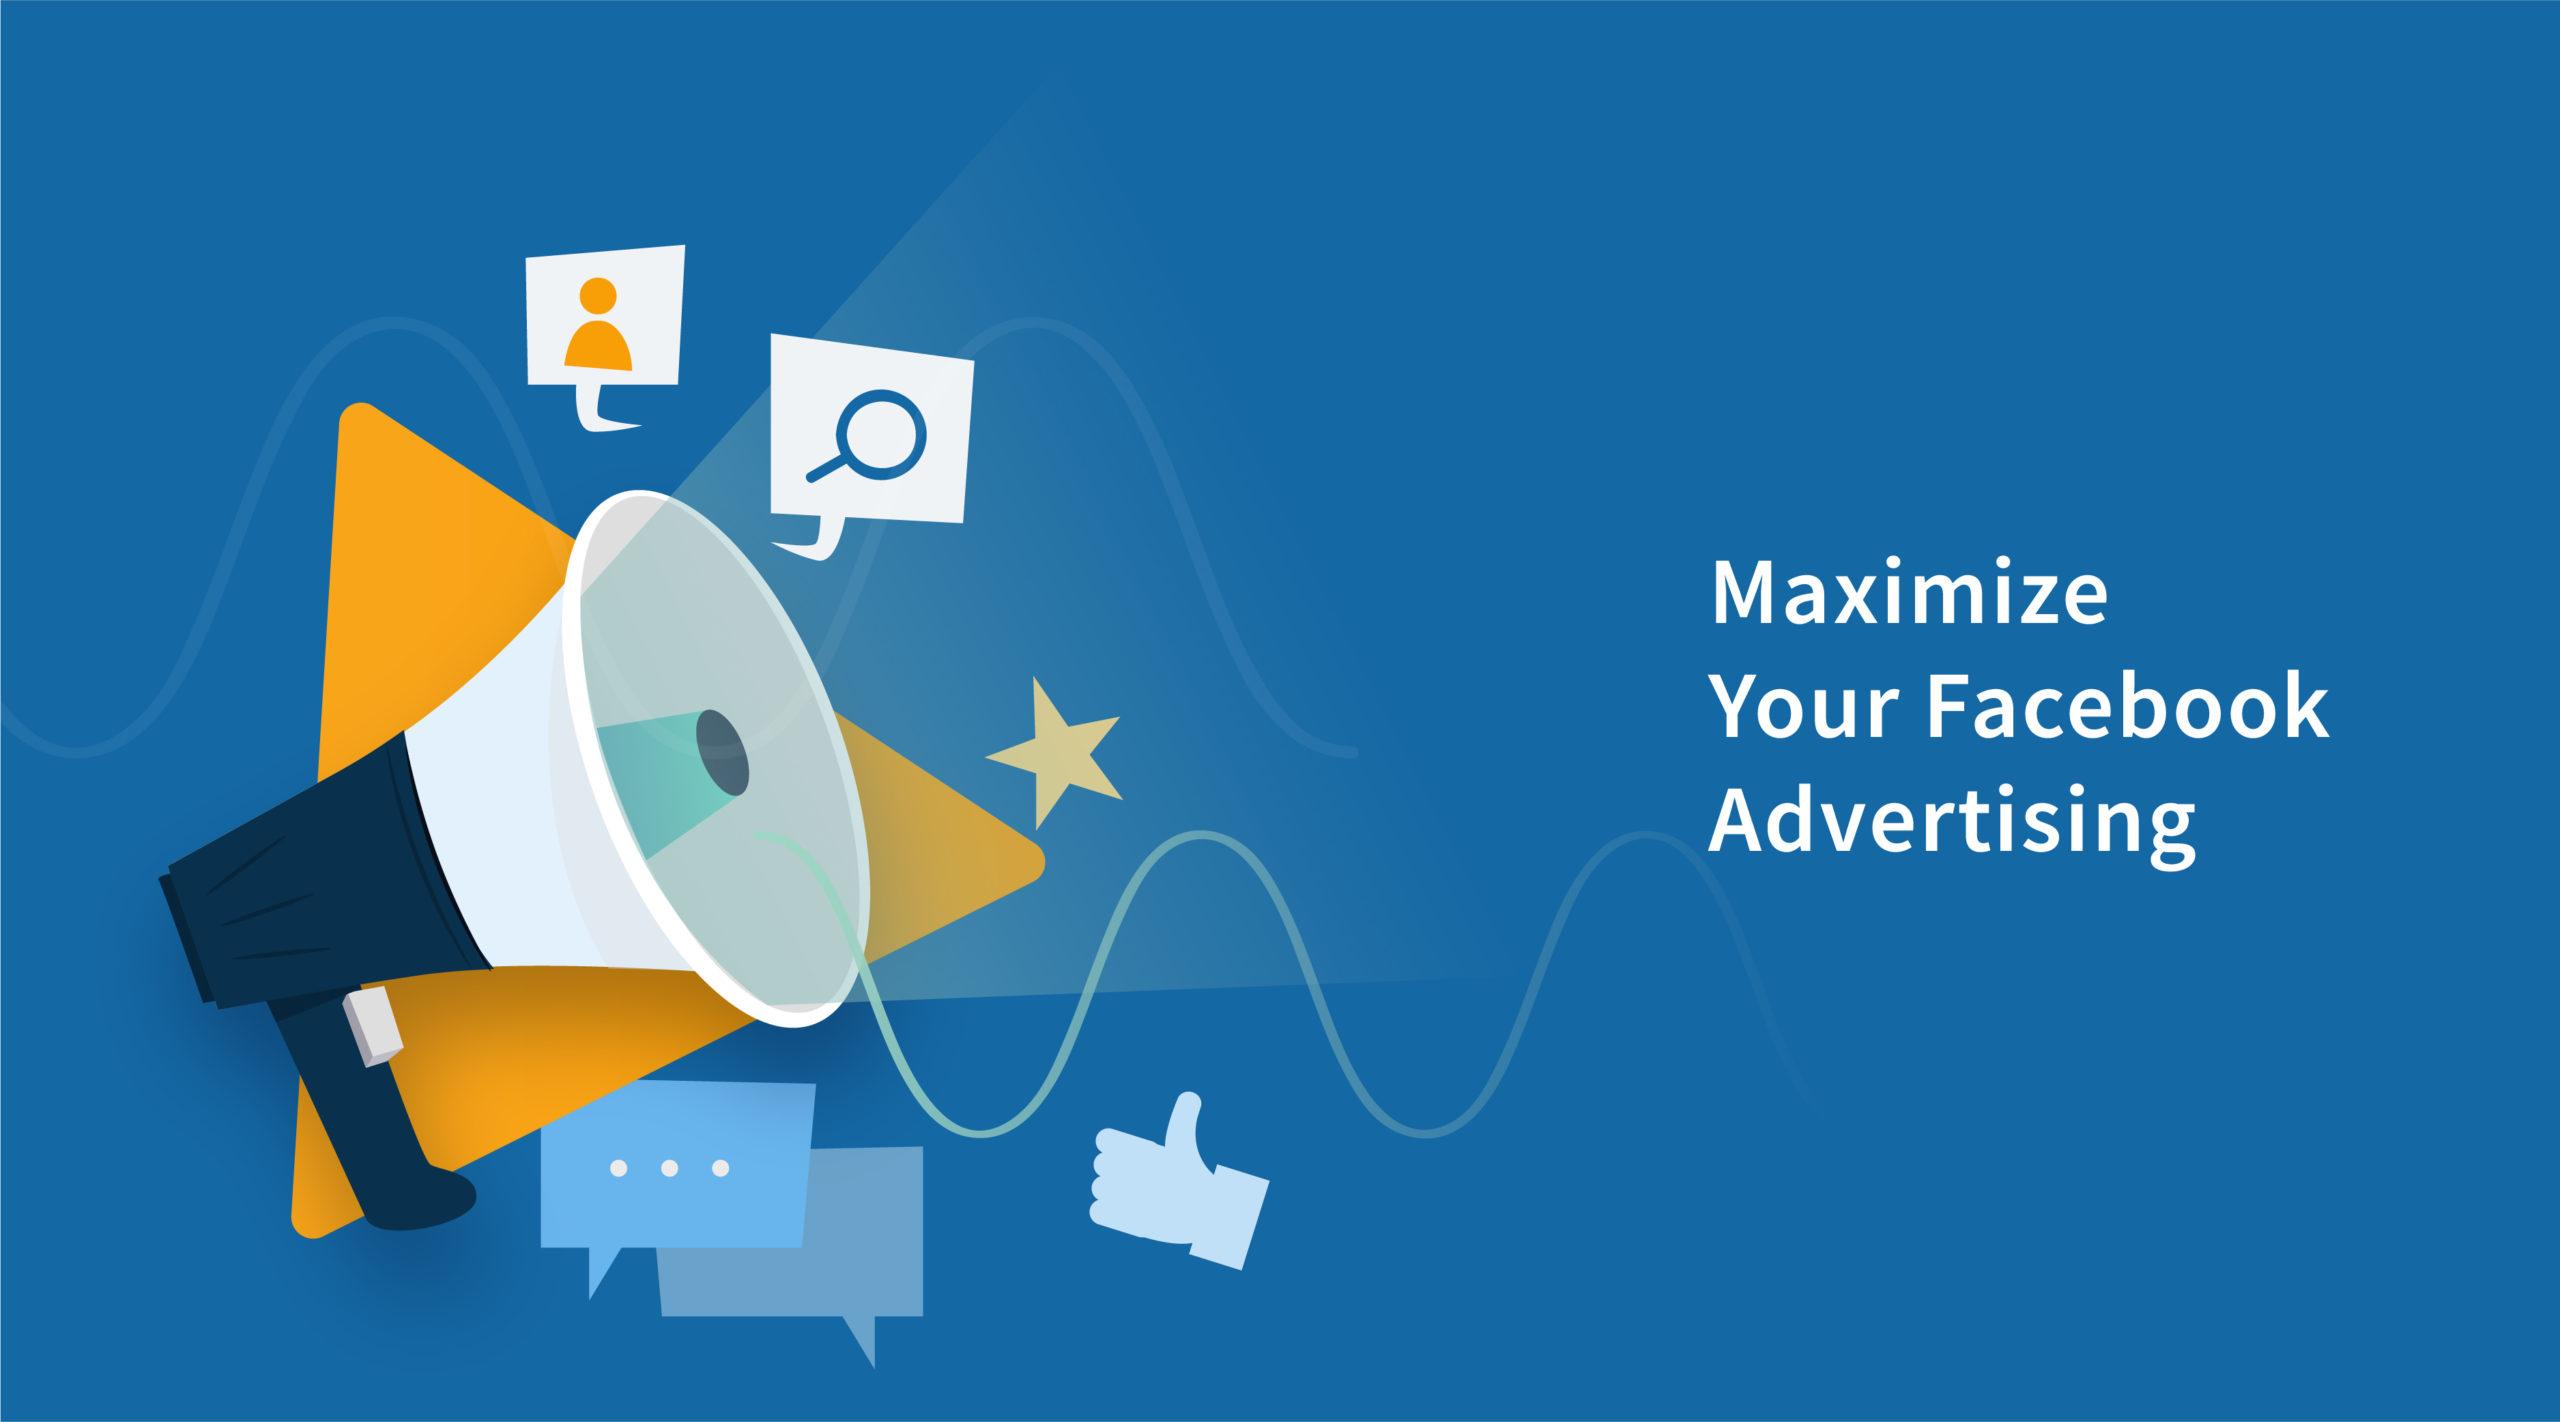 6 Ways to Maximize Your Facebook Advertising Featured Image